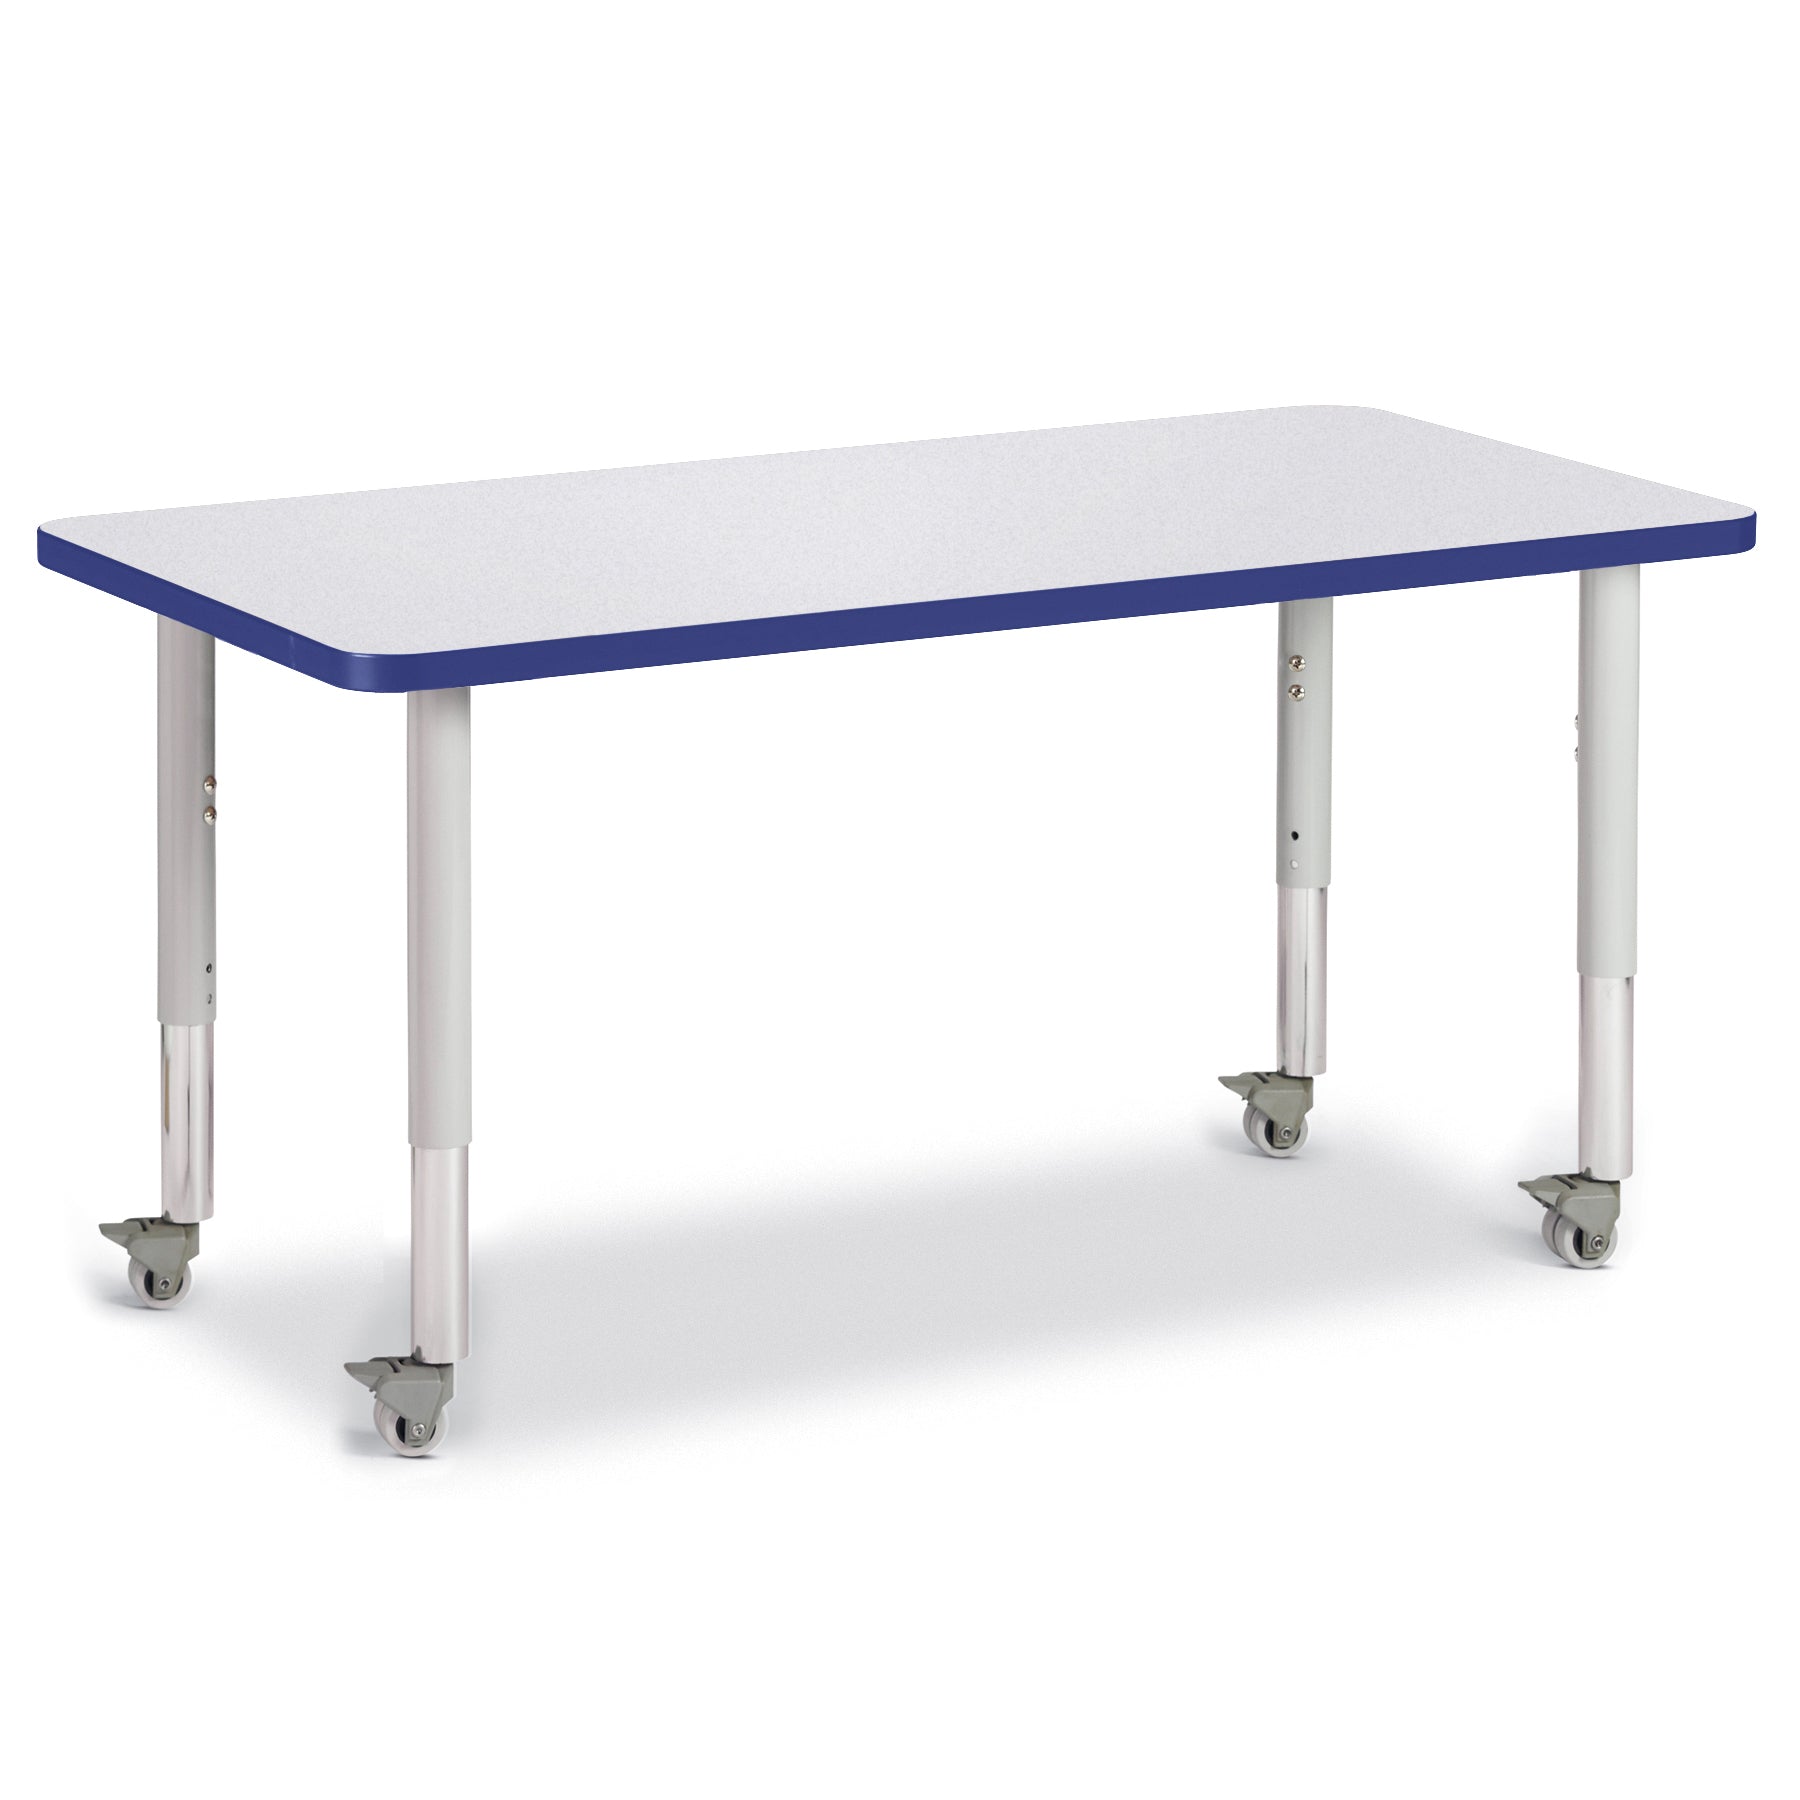 6403JCM003, Berries Rectangle Activity Table - 24" X 48", Mobile - Freckled Gray/Blue/Gray